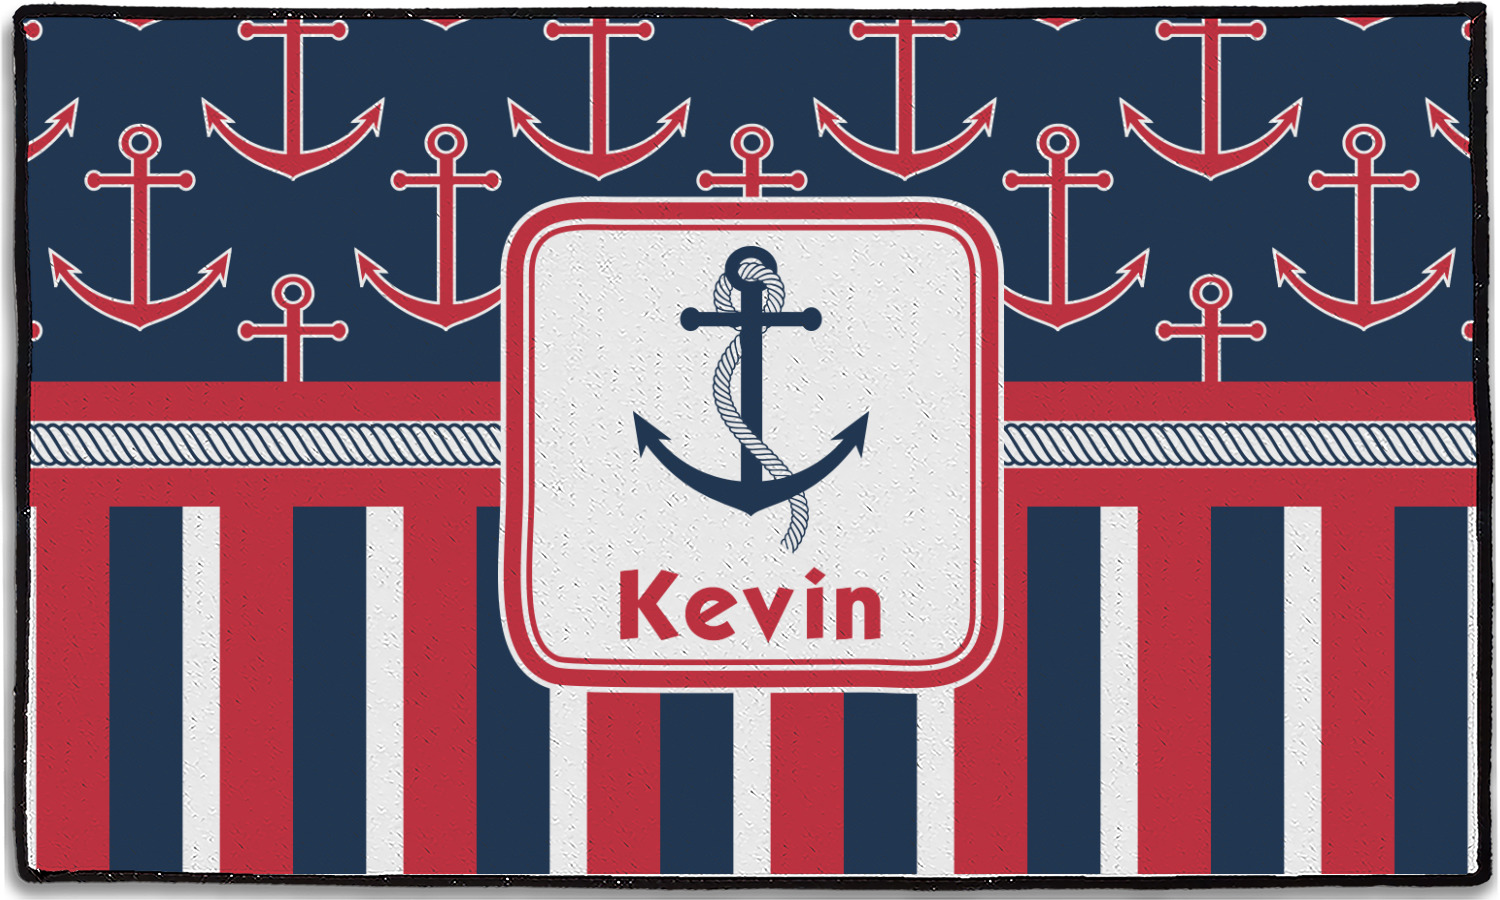 https://www.youcustomizeit.com/common/MAKE/190463/Nautical-Anchors-Stripes-Personalized-60x36-APPROVAL.jpg?lm=1601052920